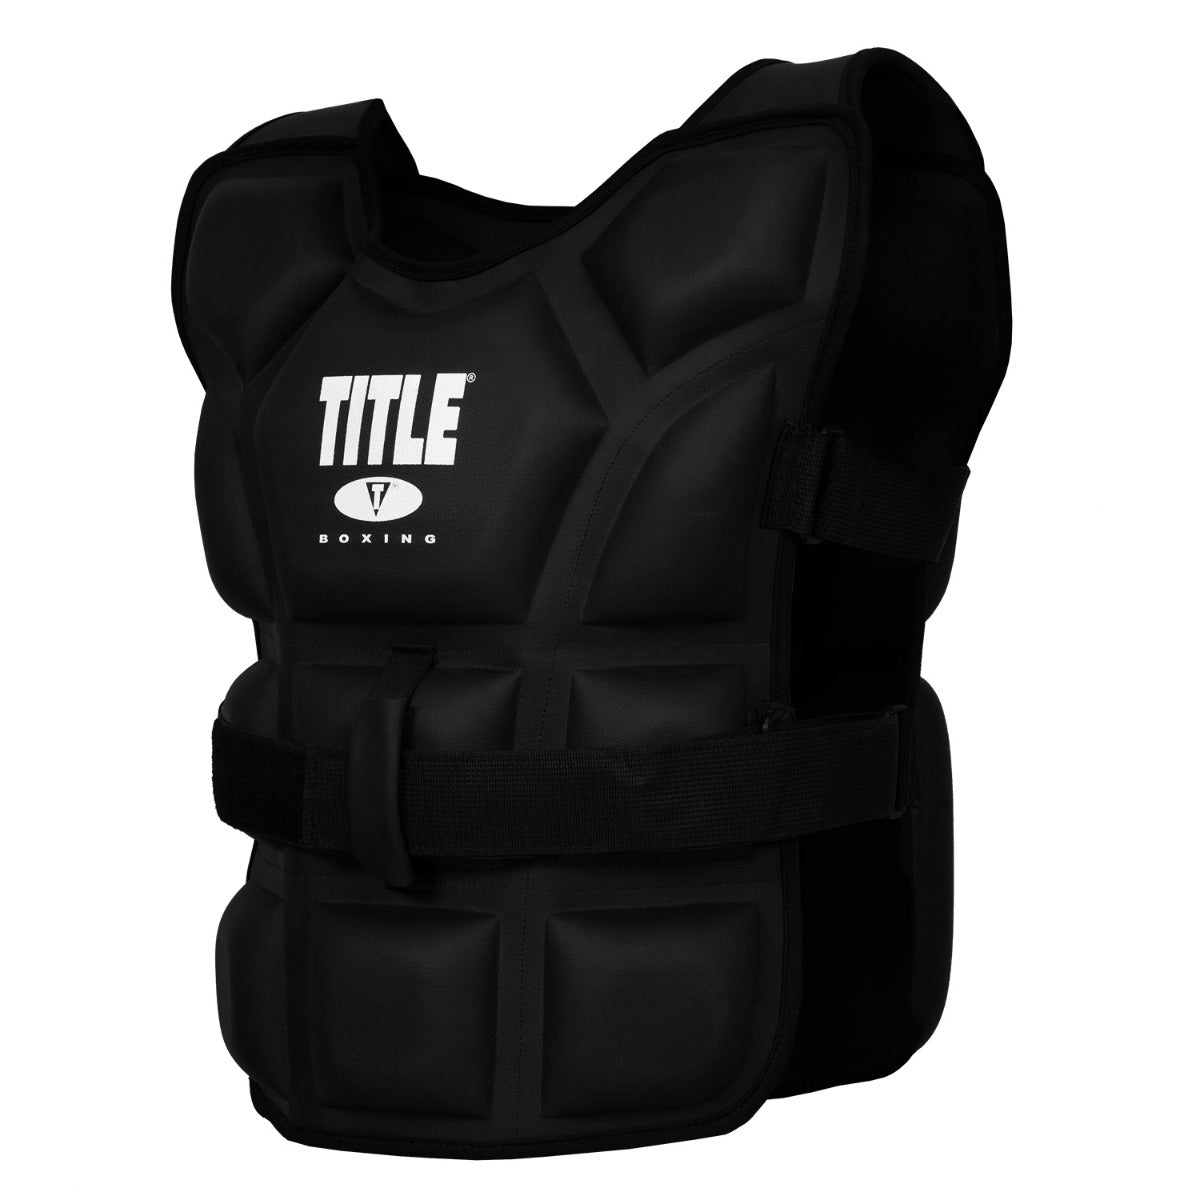 TITLE Boxing “Big Flex” Weighted Training Vest